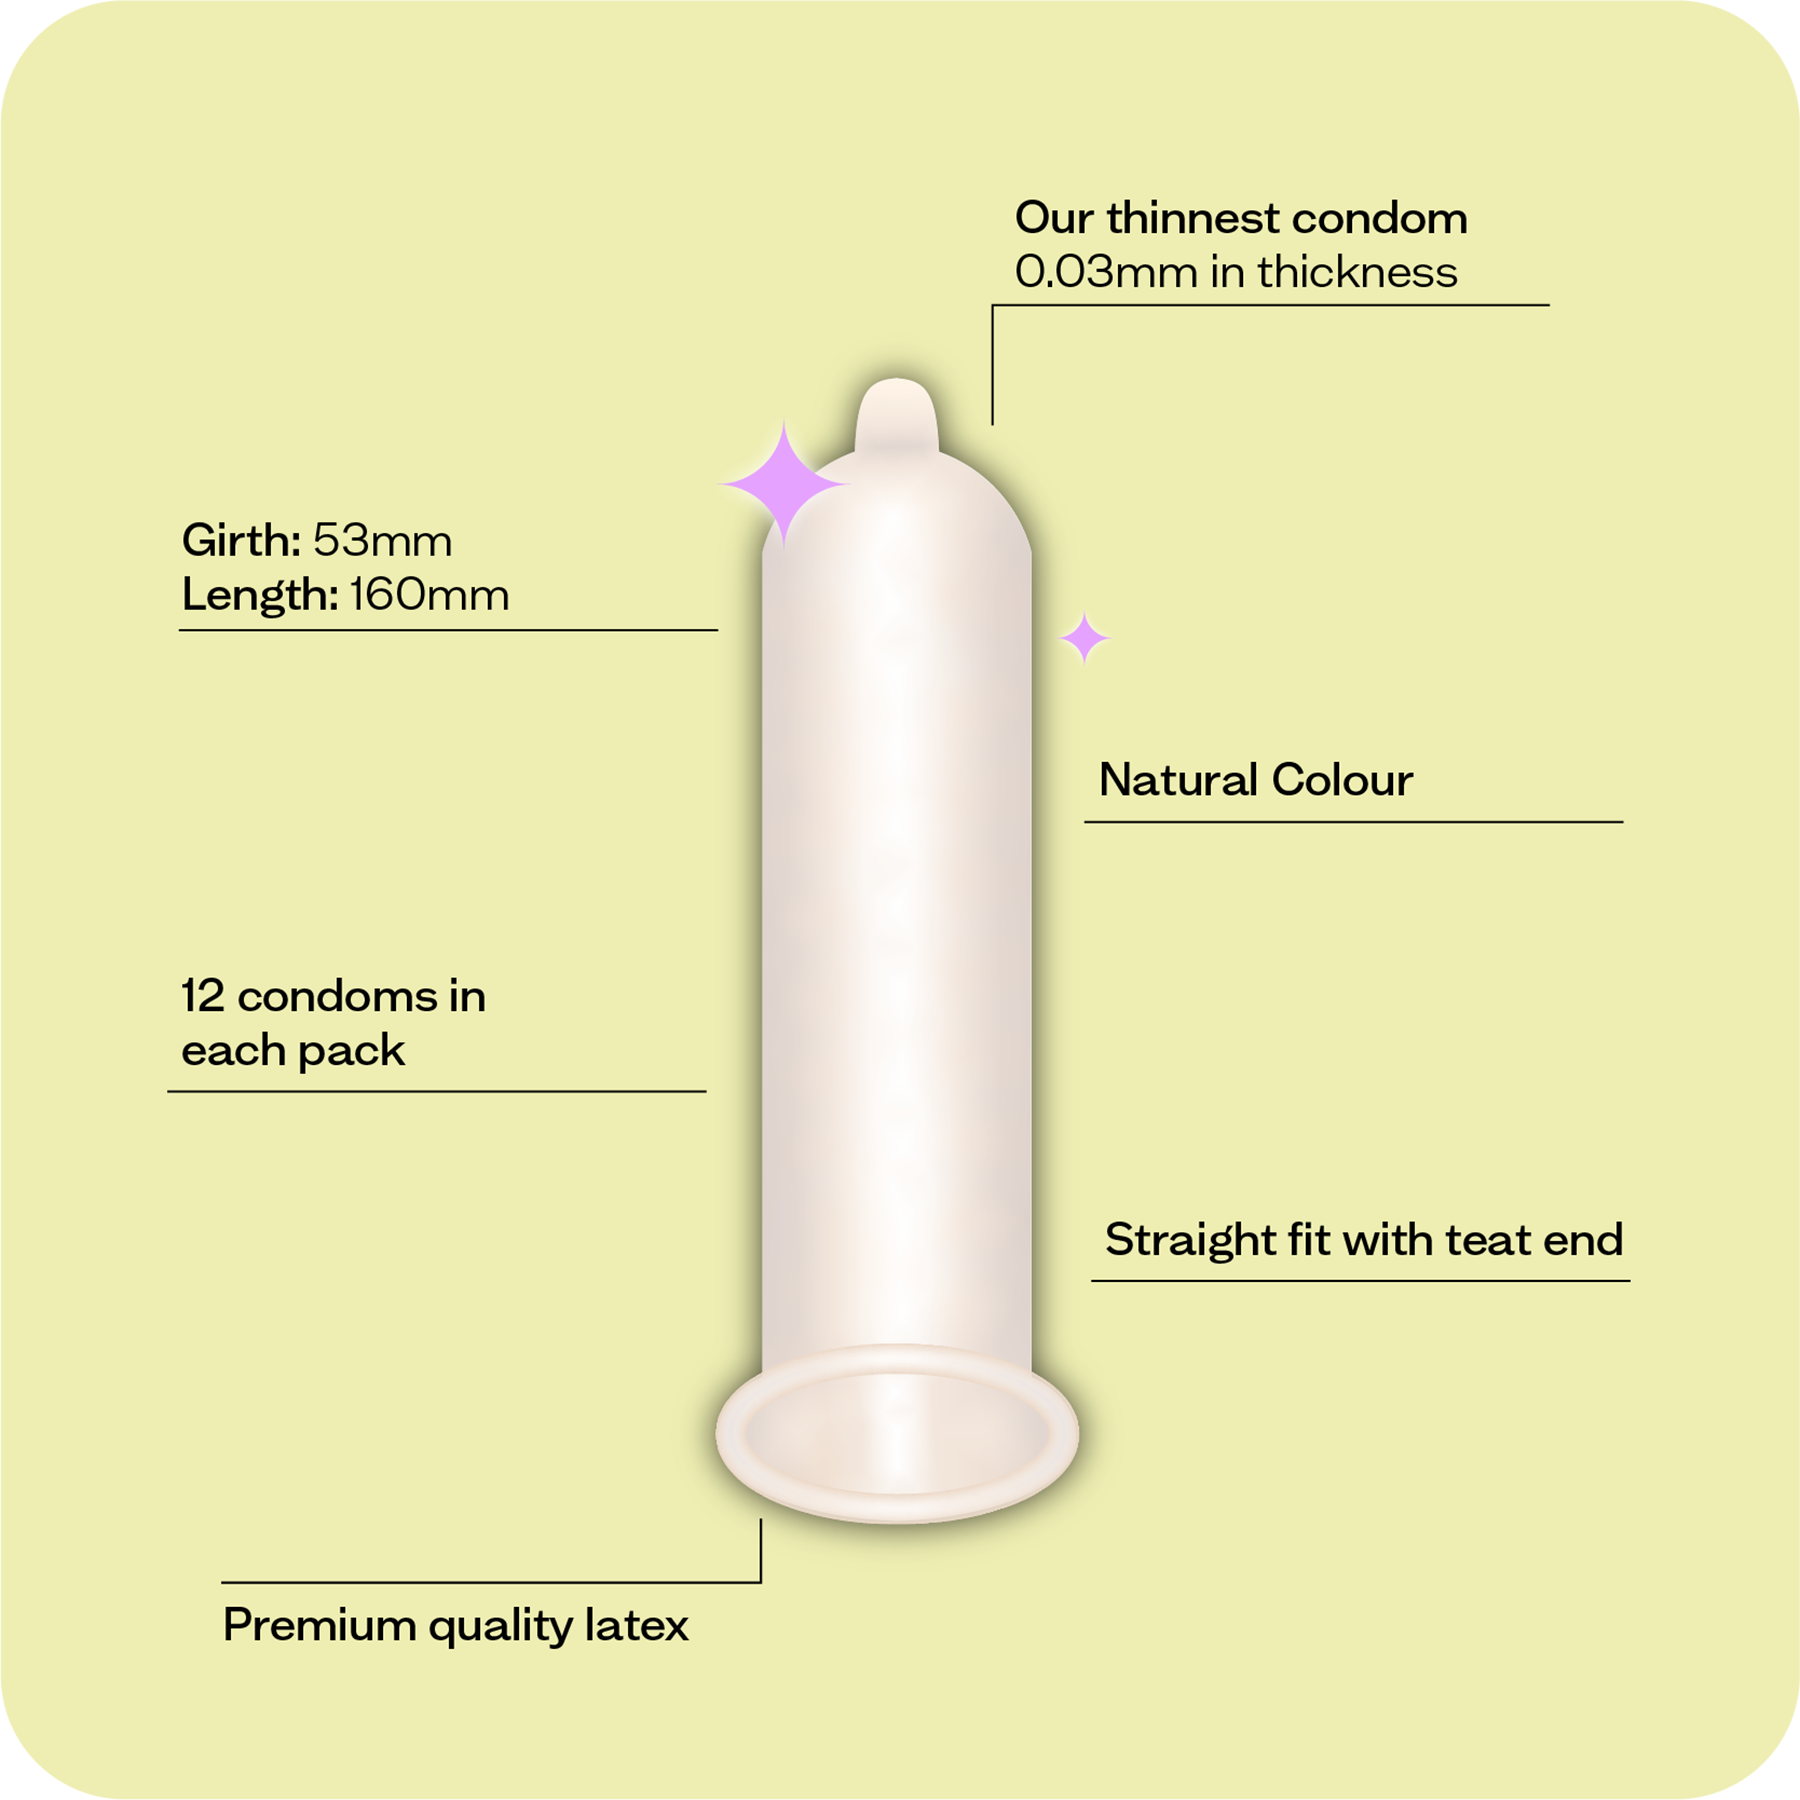 Exploded view of Moments Mega Thin 0.03 condom highlighting its ultra-thin design